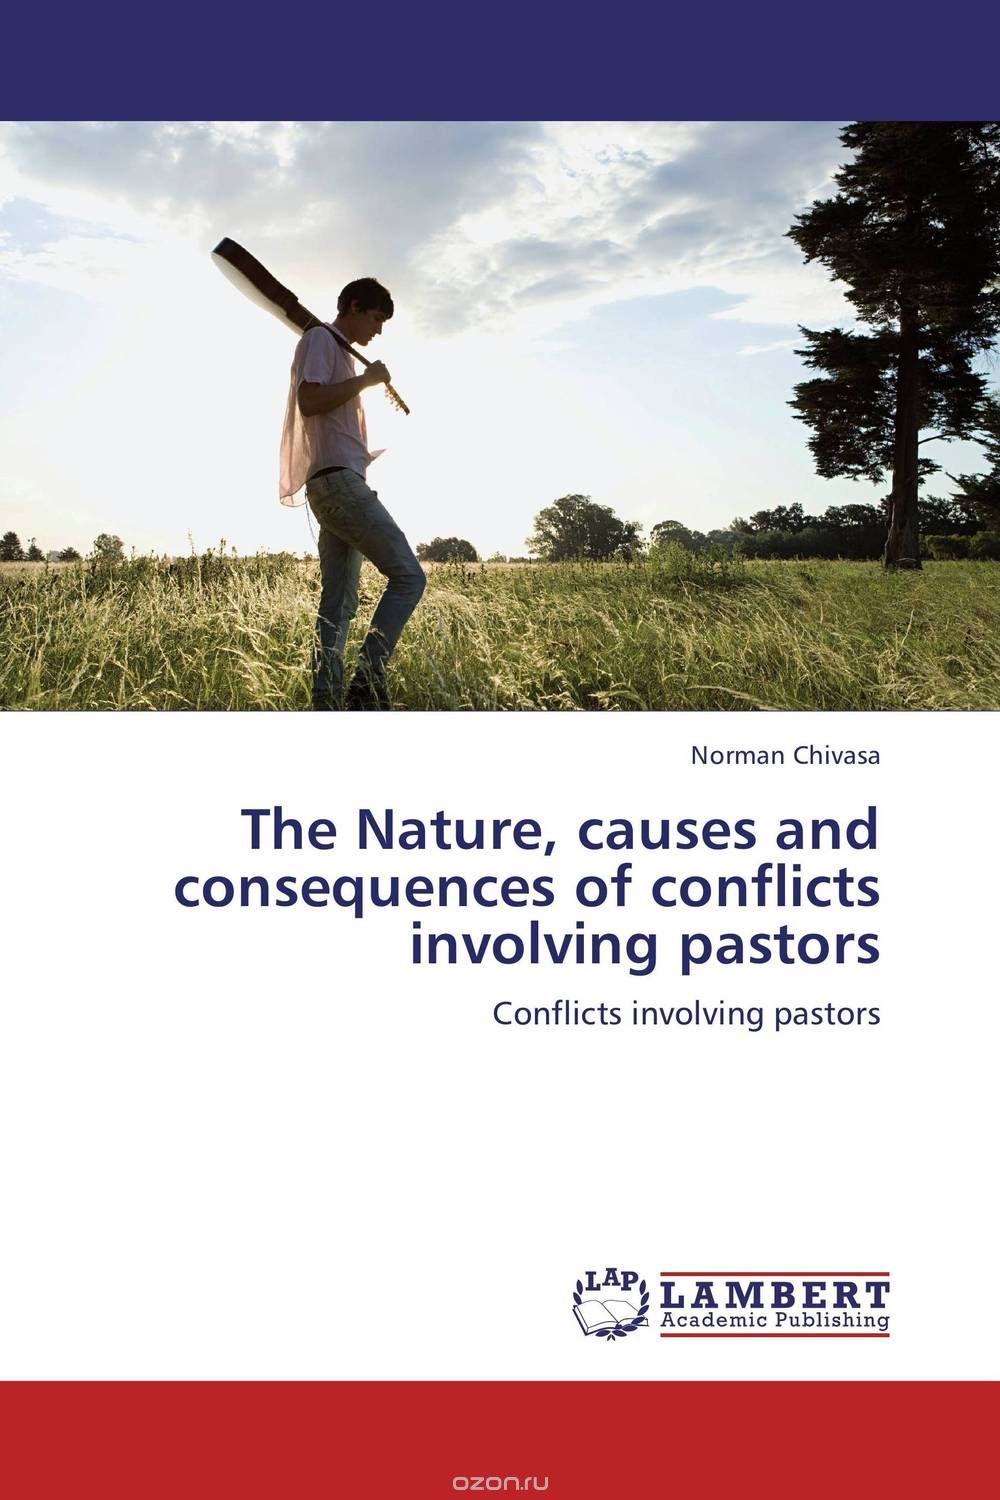 Скачать книгу "The Nature, causes and consequences of conflicts involving pastors"